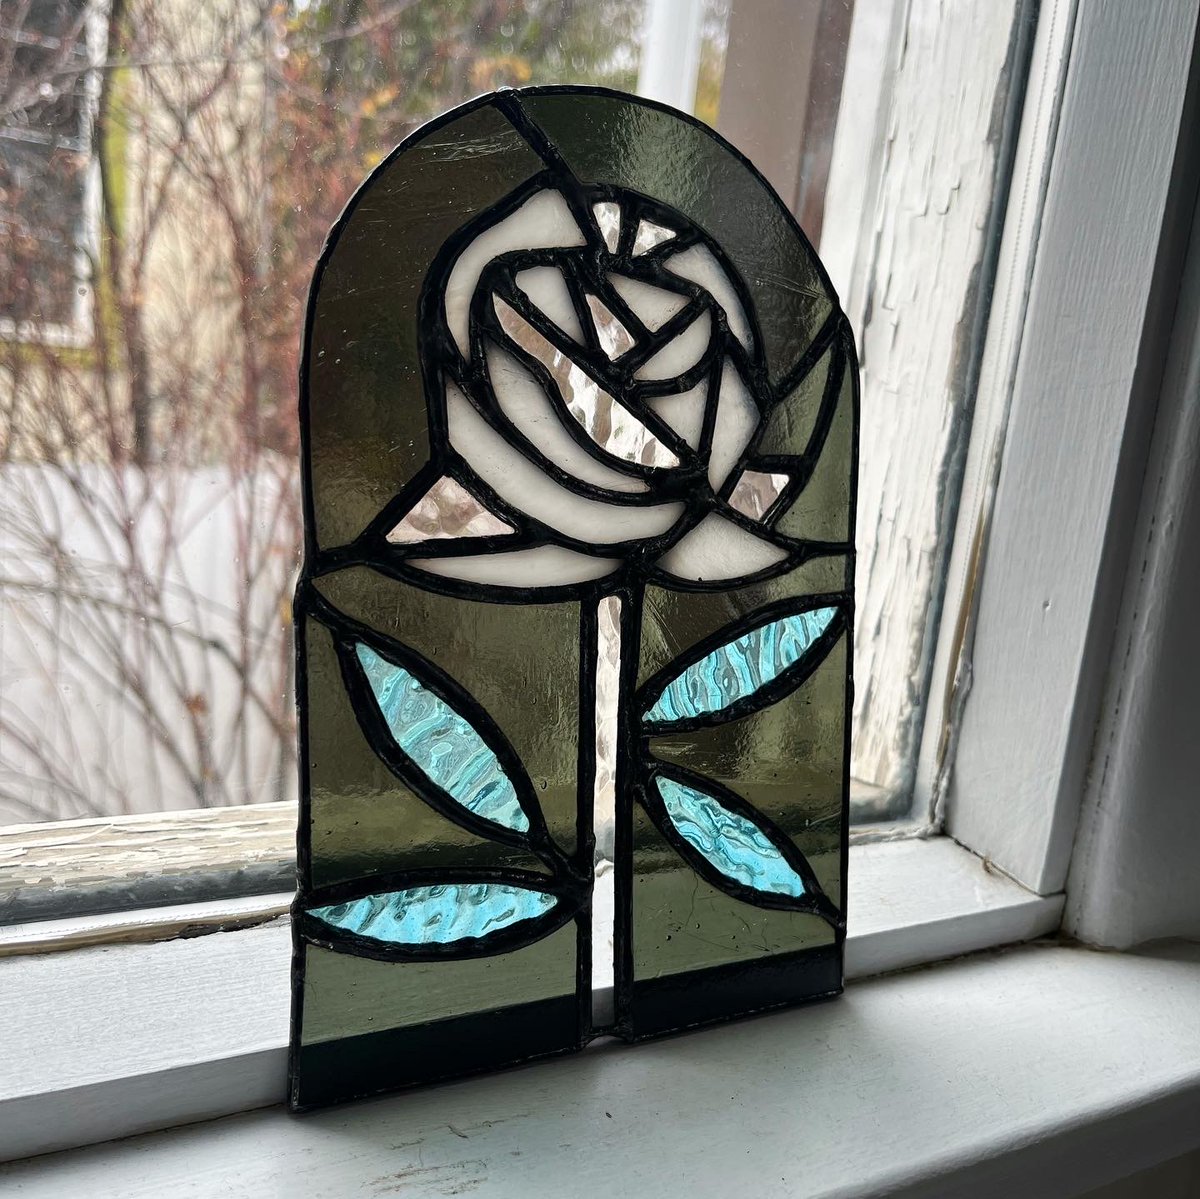 Not perfect in any way…. But I’m quite proud of myself for completing my first original design, in stained glass! More to come, and more practicing before I attempt anything too difficult. Hopefully one day I can explore ways to hybrid glass and my illustrations 💛 #yegarts